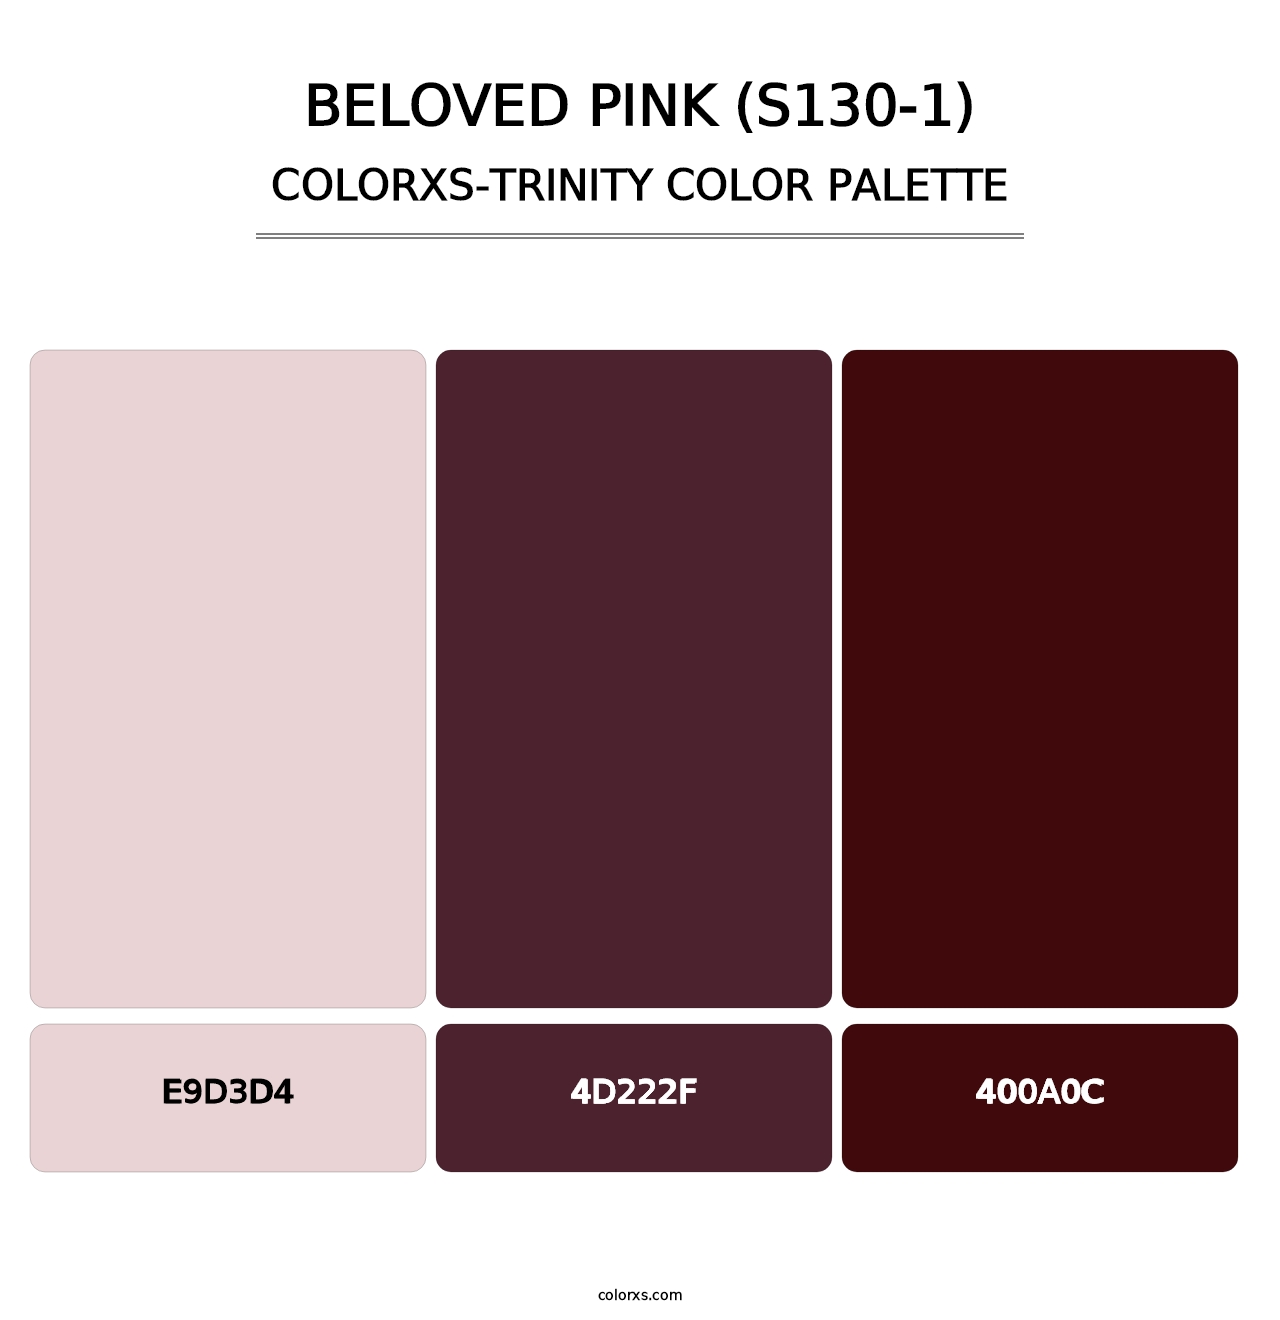 Beloved Pink (S130-1) - Colorxs Trinity Palette